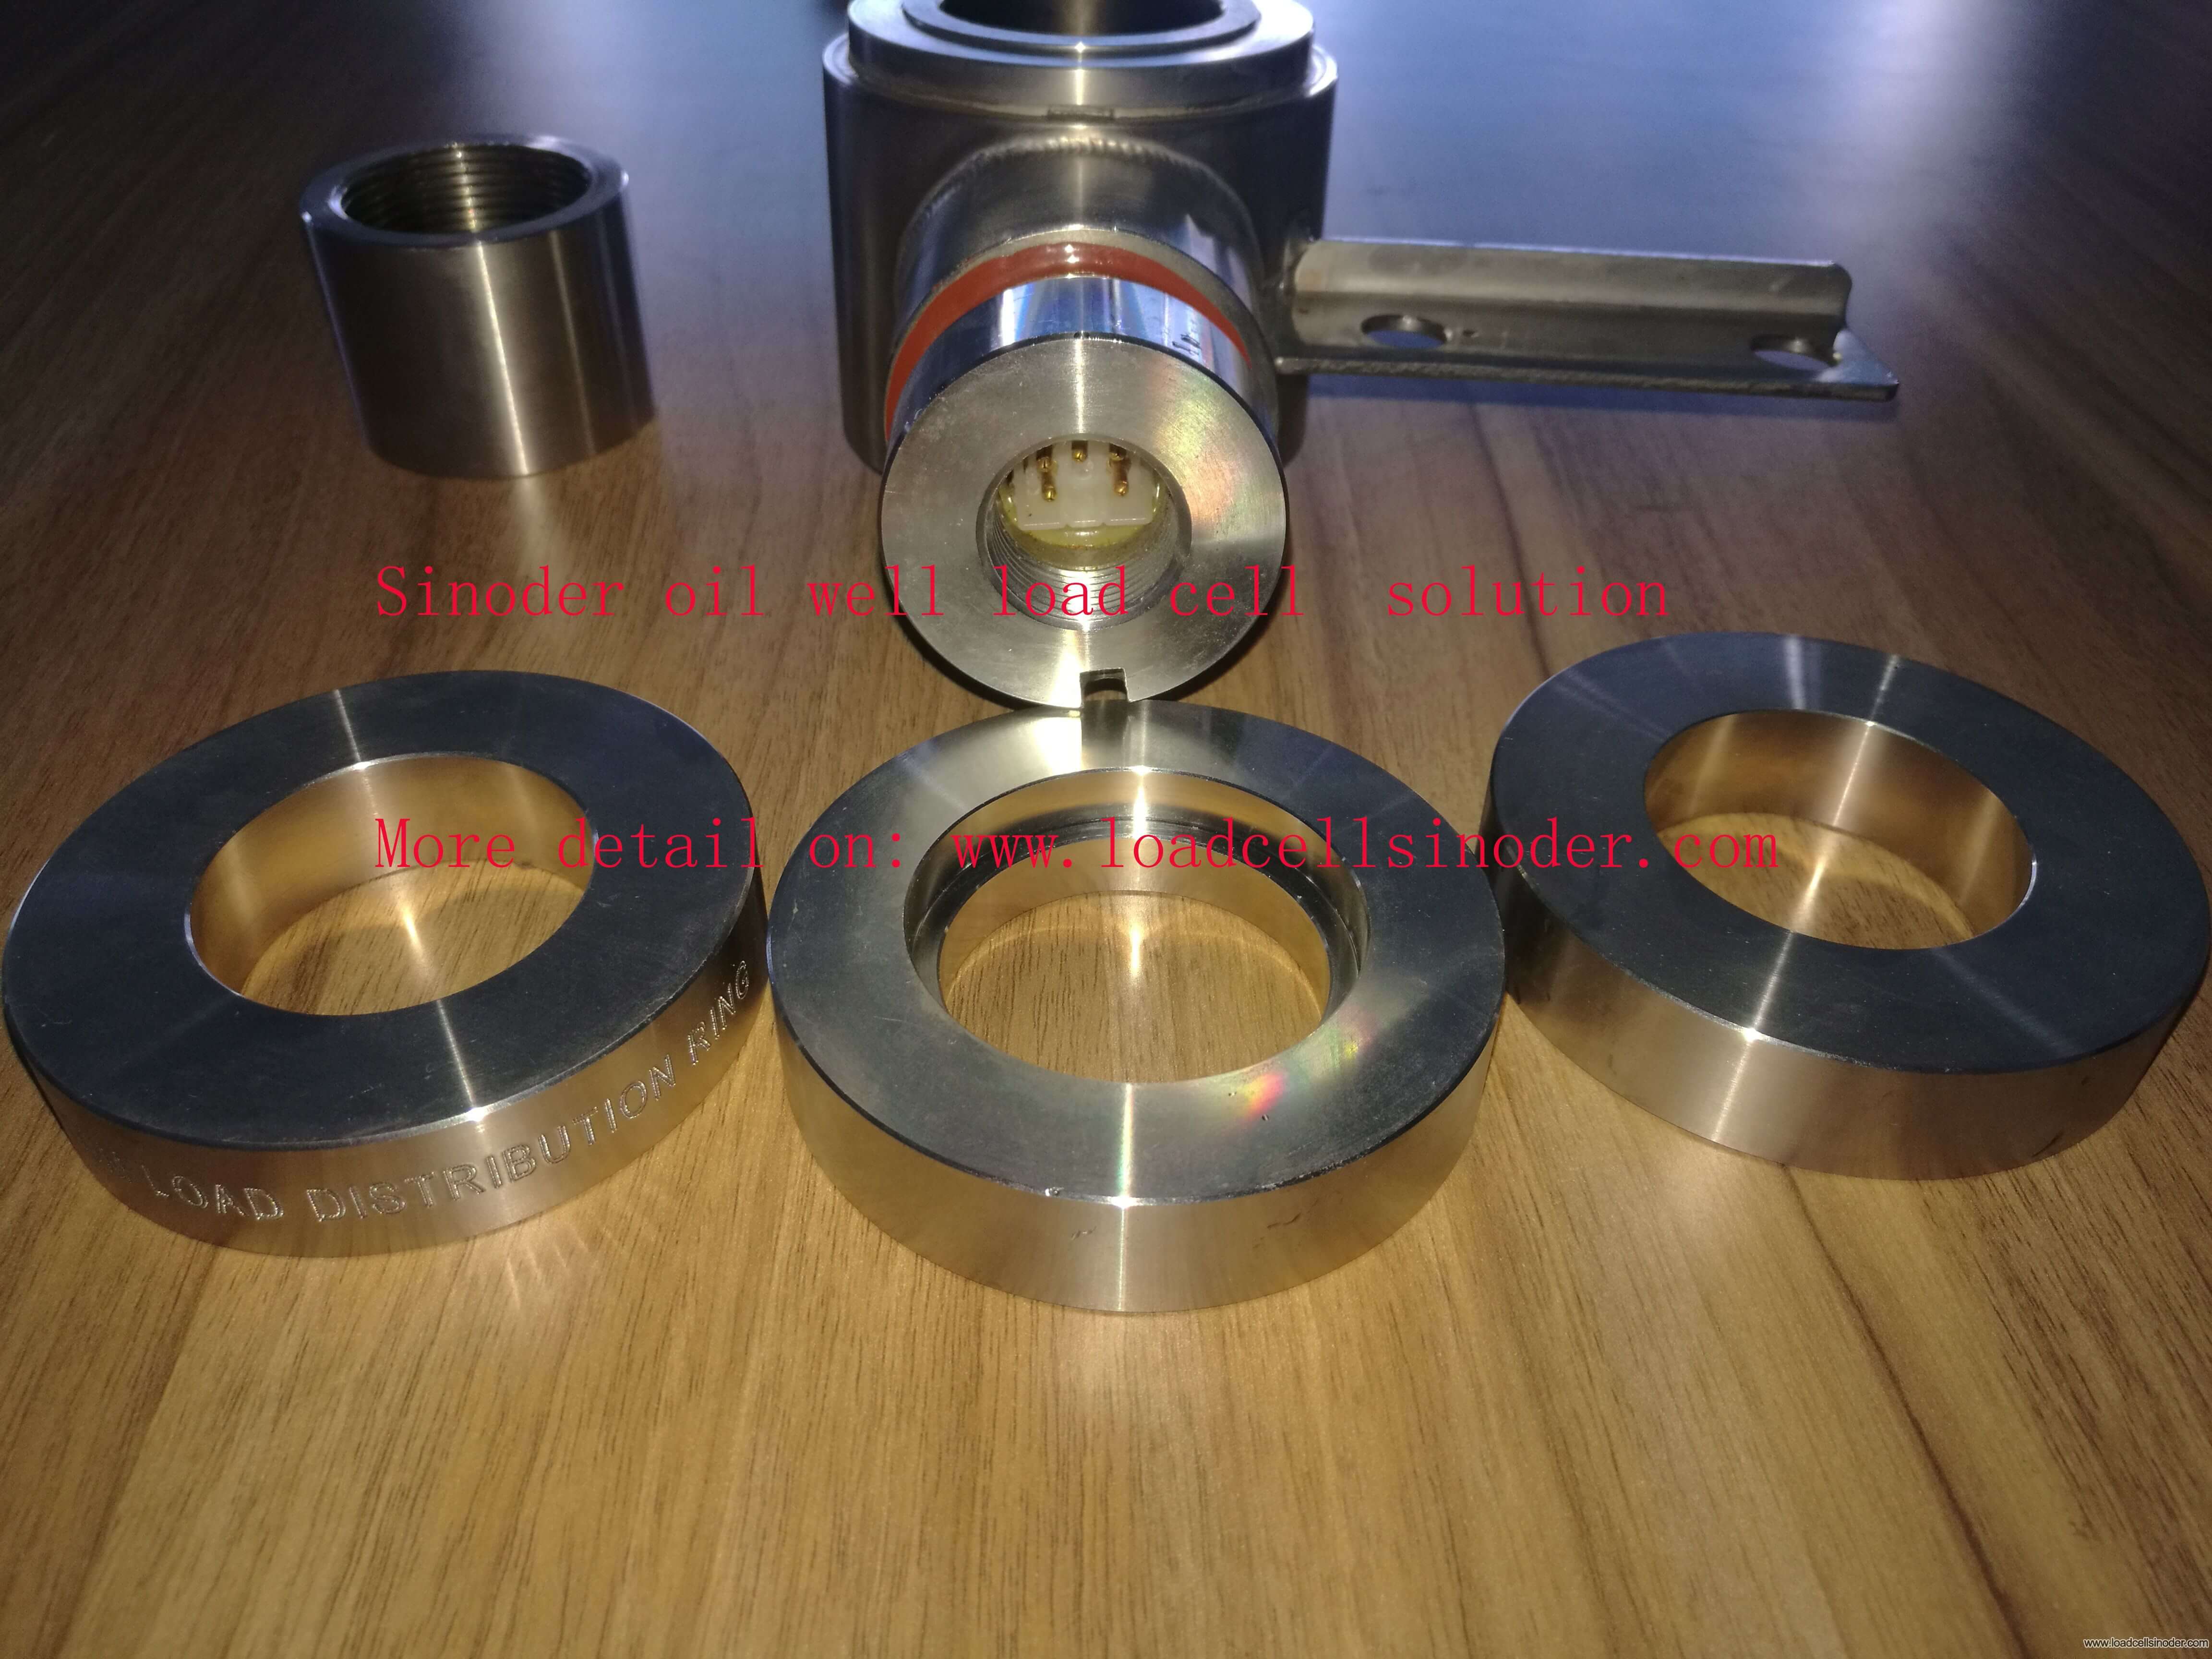 Sinoder oil well customized load cell solution 